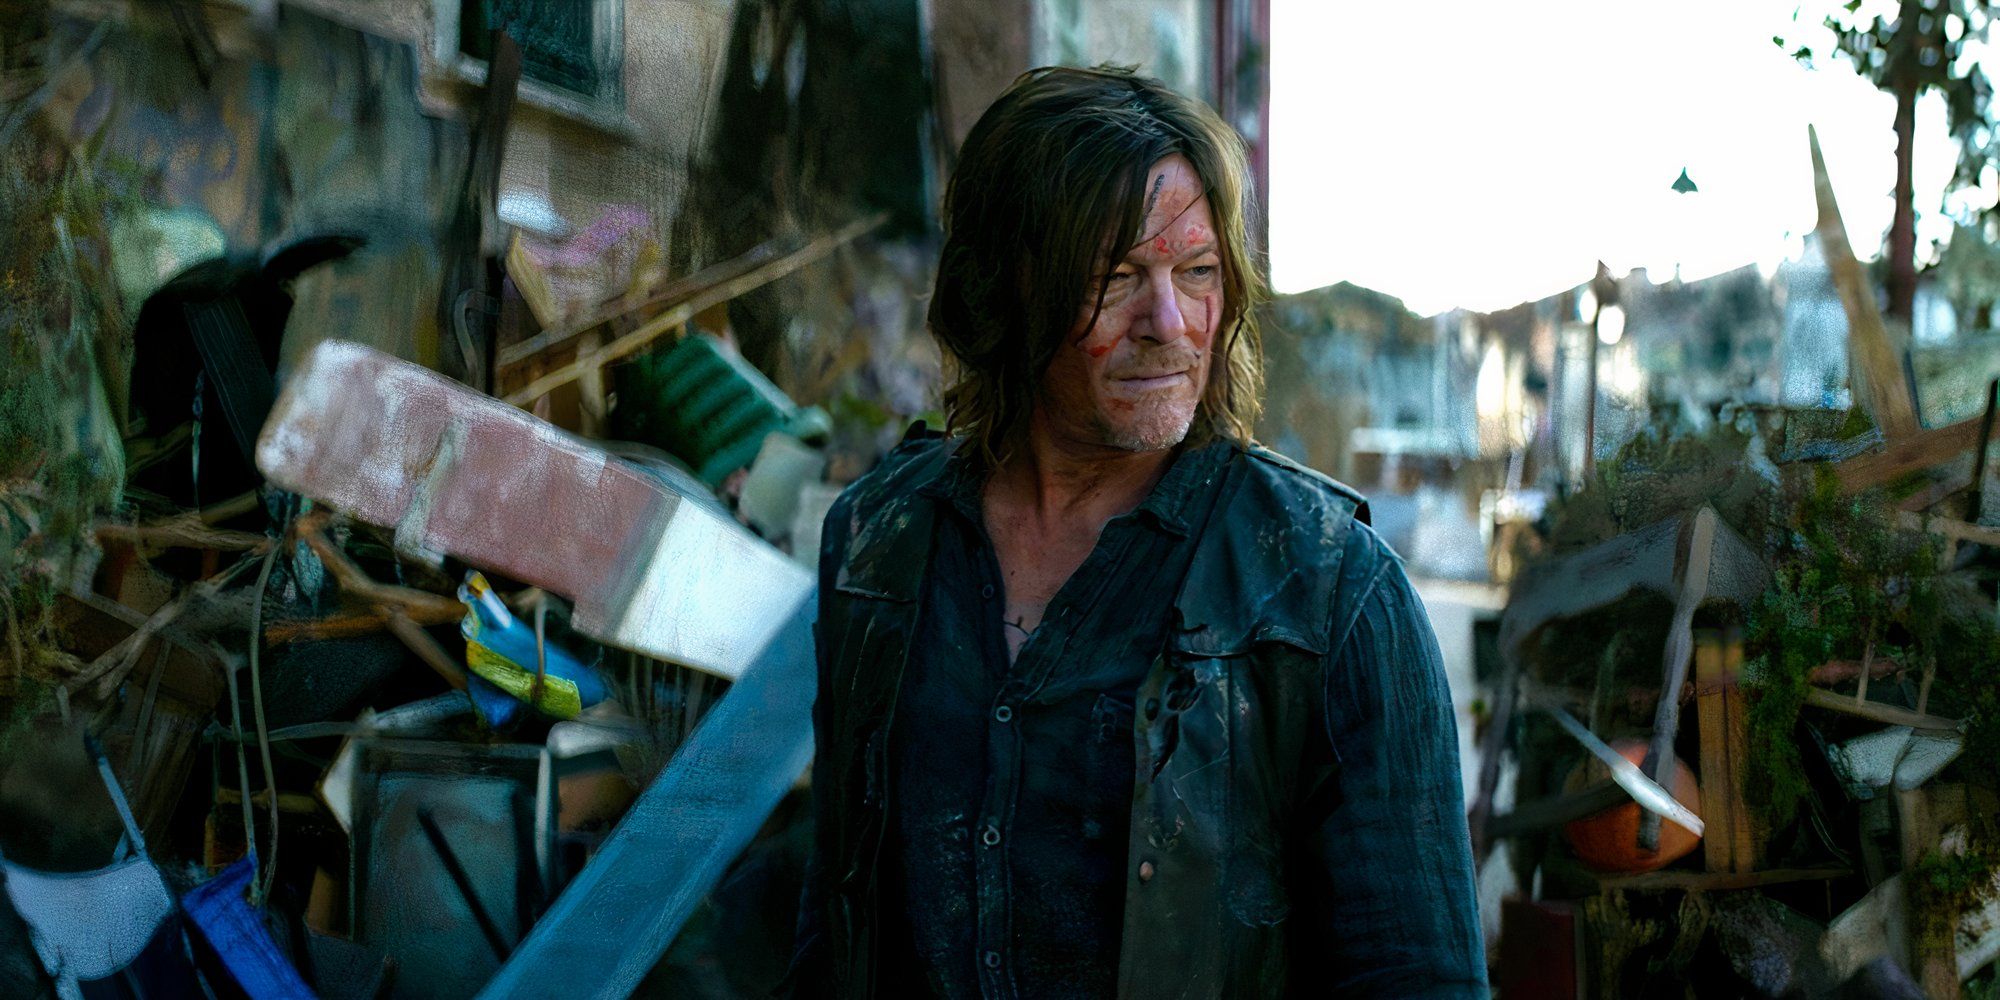 Norman Reedus stands bloody and battered, gazing around as if stunned at the rubble, in a scene from The Walking Dead: Daryl Dixon season 1